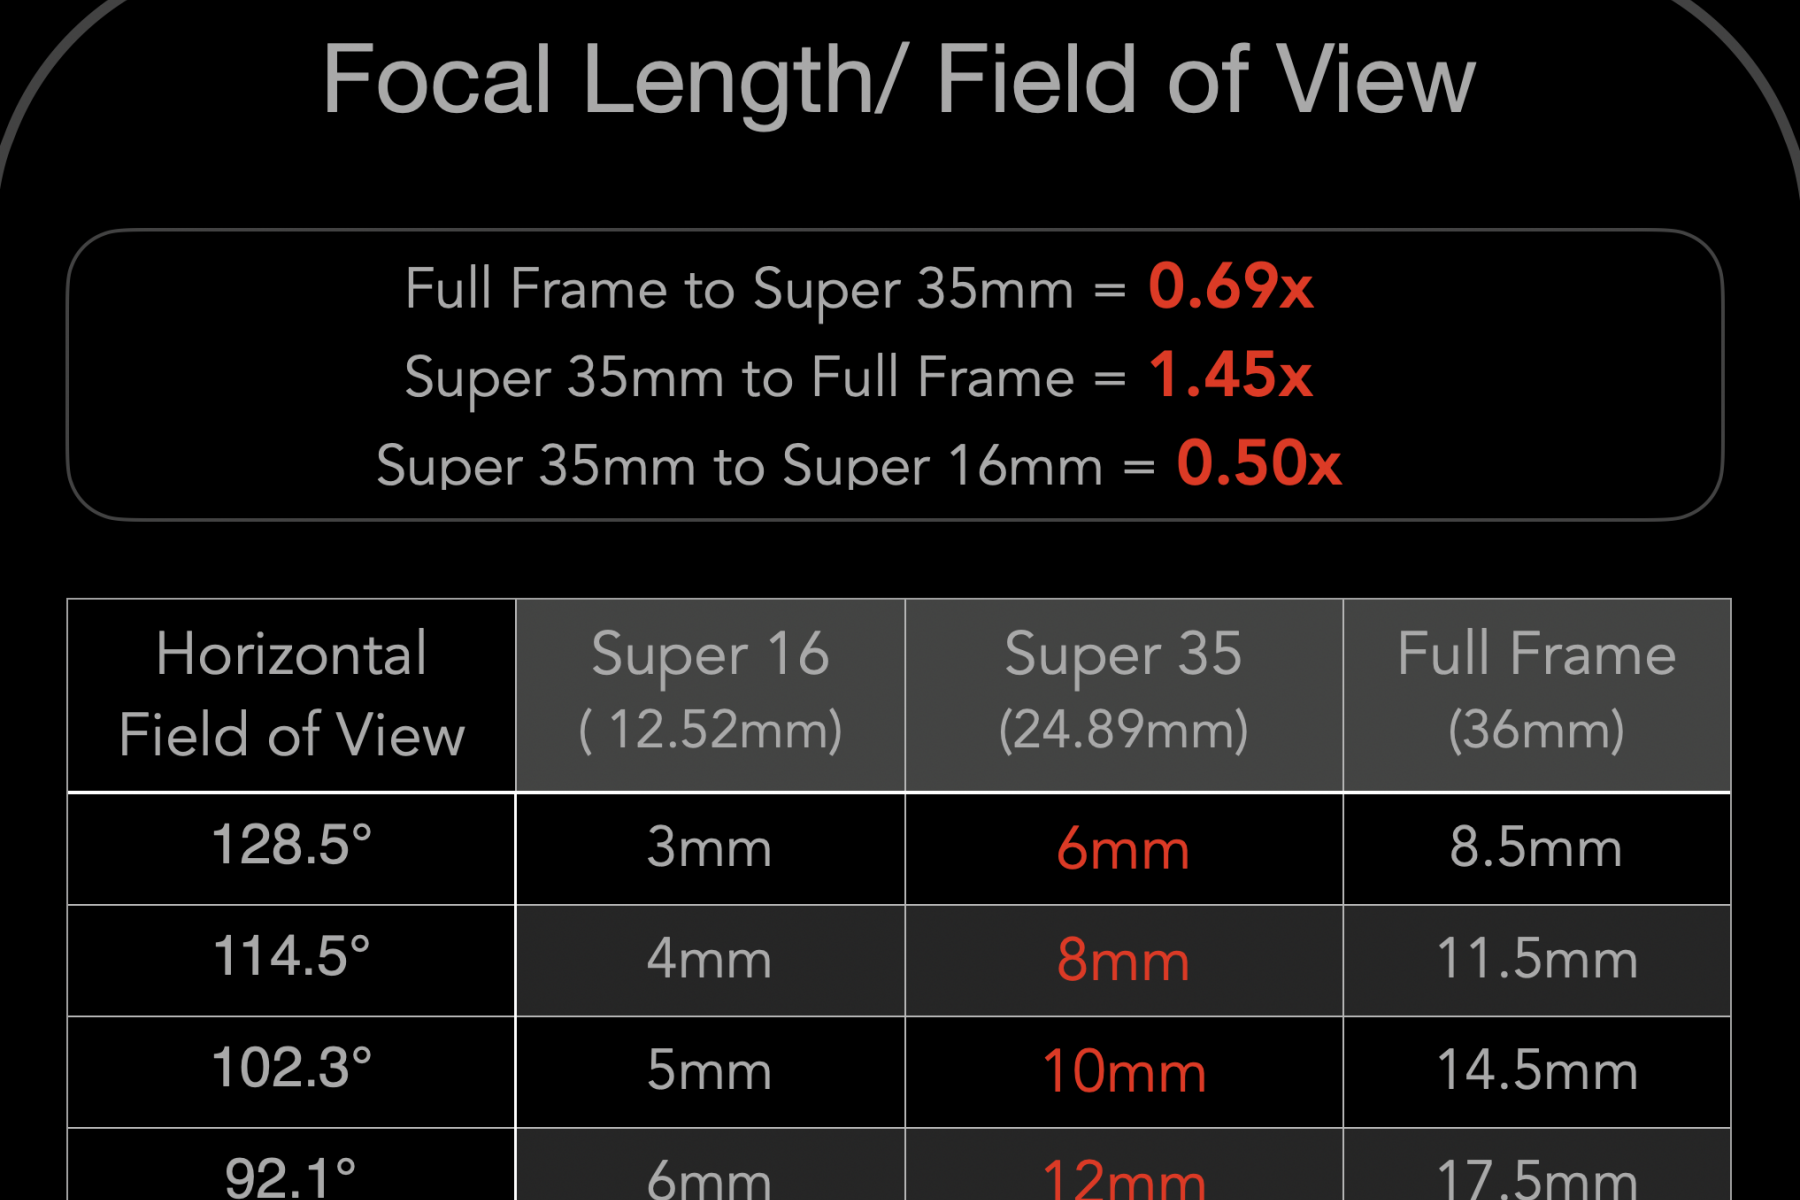 Calculate - S16mm, S35mm and Full Frame lenses chater